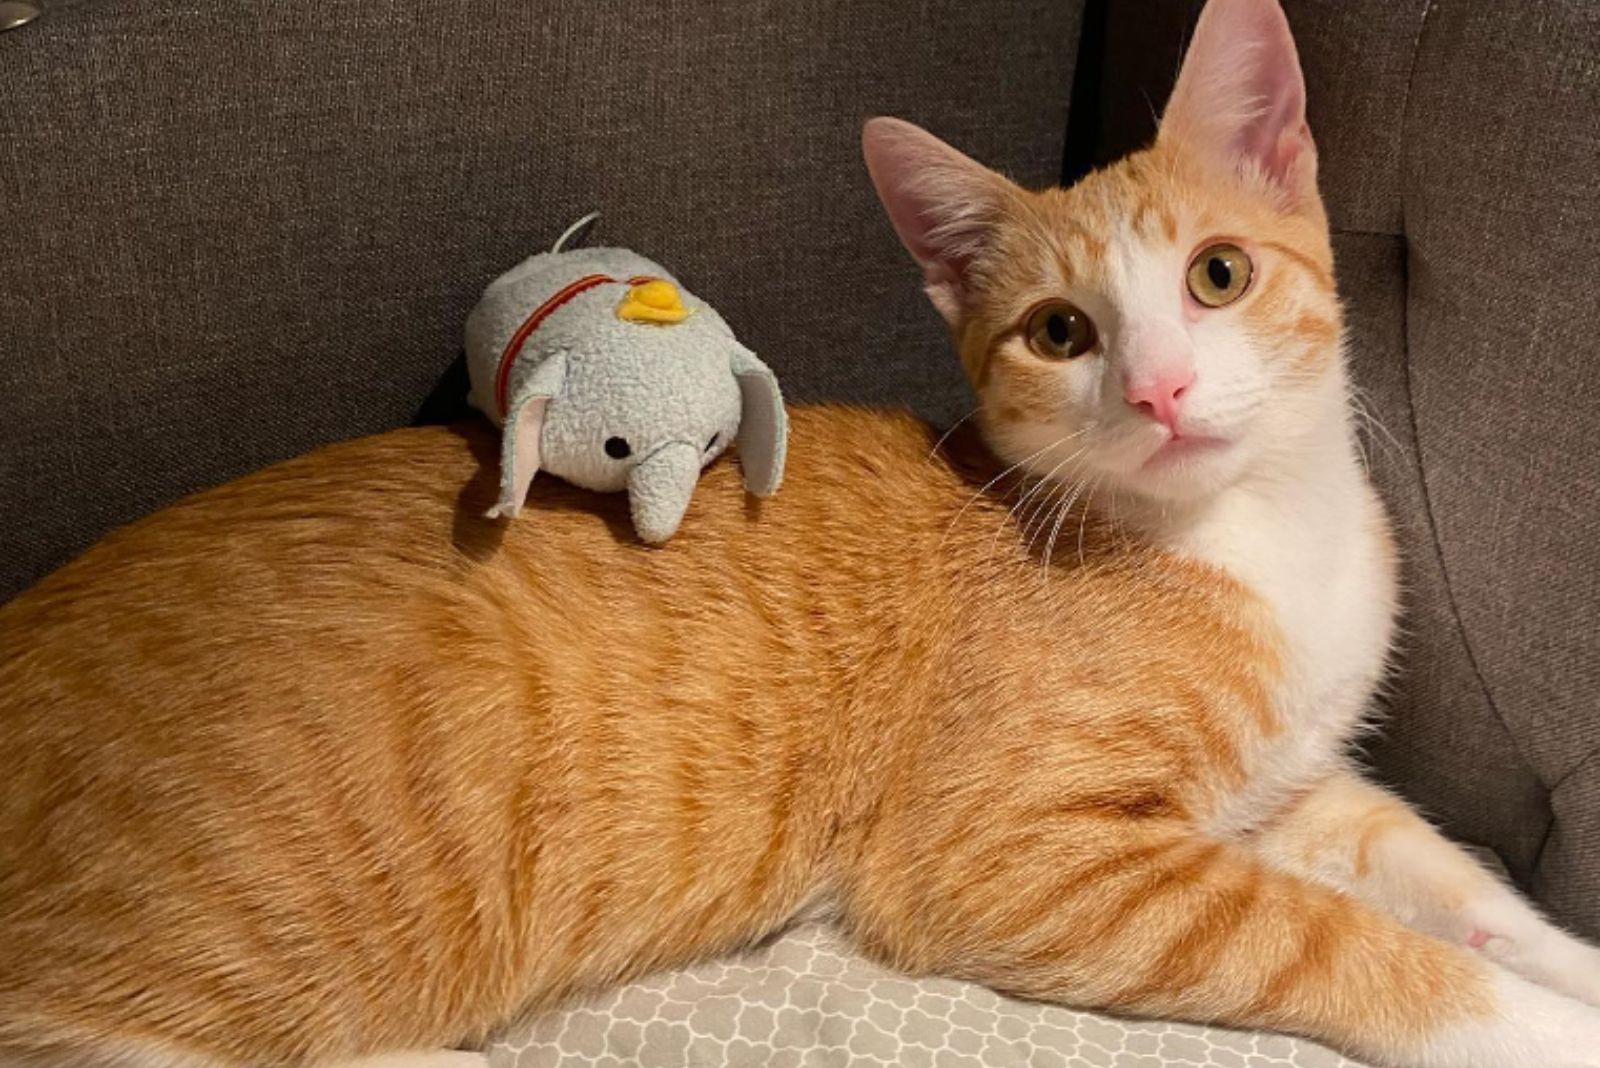 ginger cat and toy